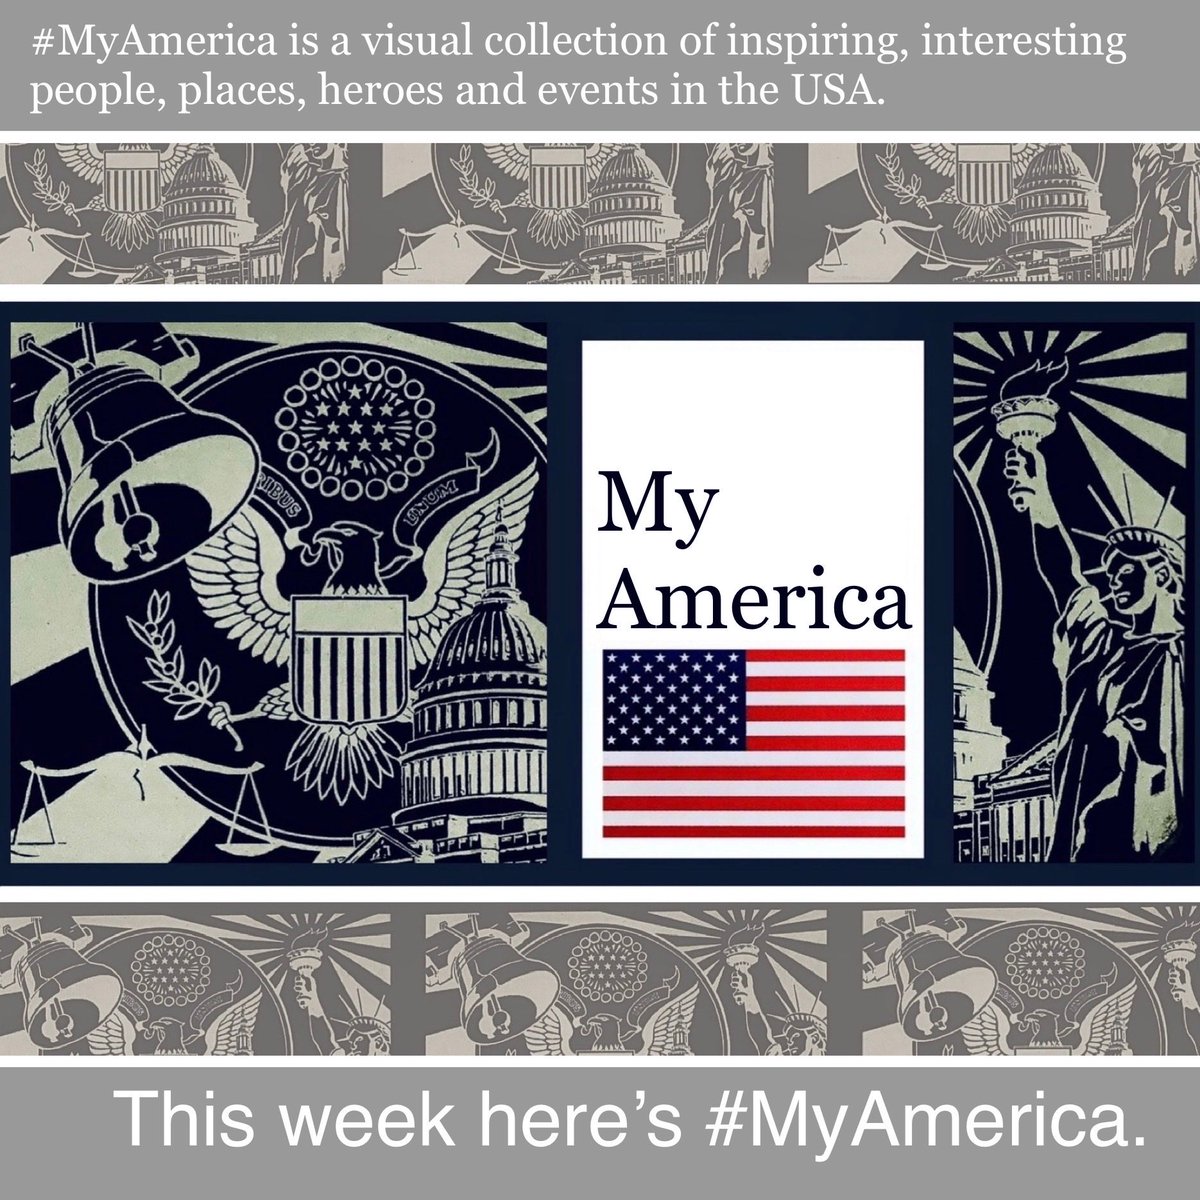 @Politics/#Politics/#AmericanPolitics/#MyAmerica is a visual collection of inspiring, interesting people, places, heroes and events in the USA. This week here’s #MyAmerica